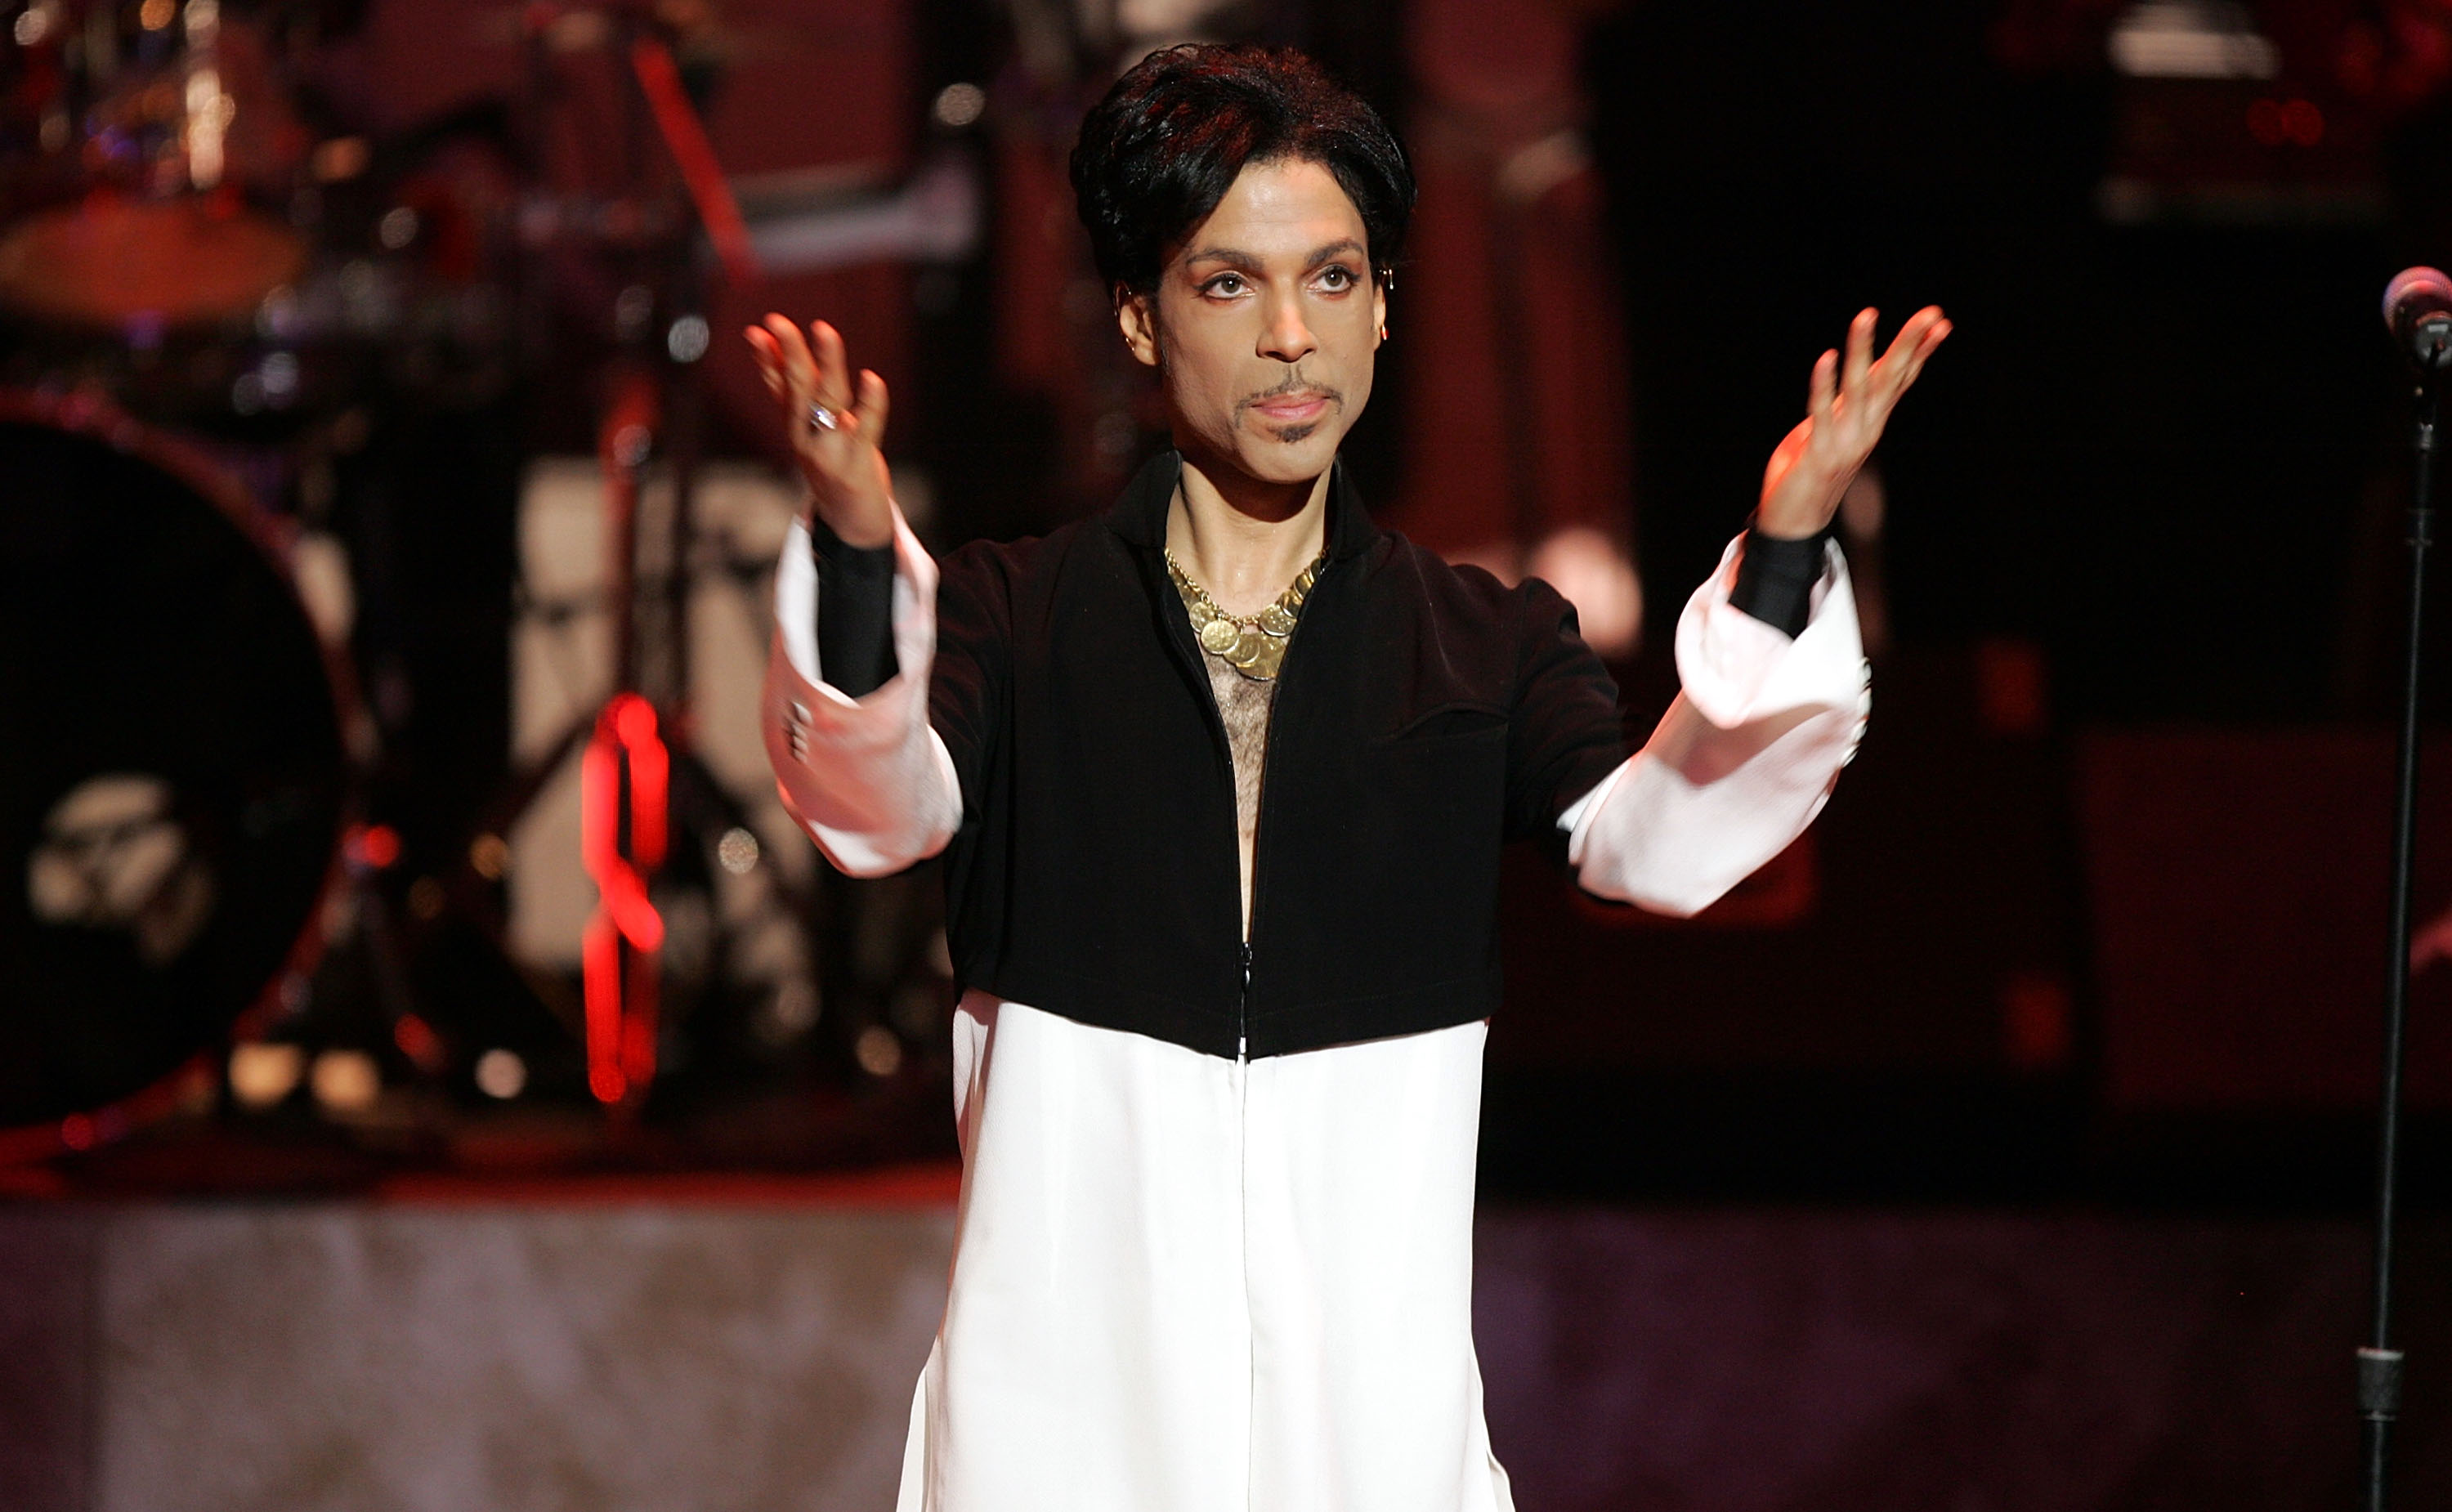 Prince ou "The Artist" (Foto: Getty Images)